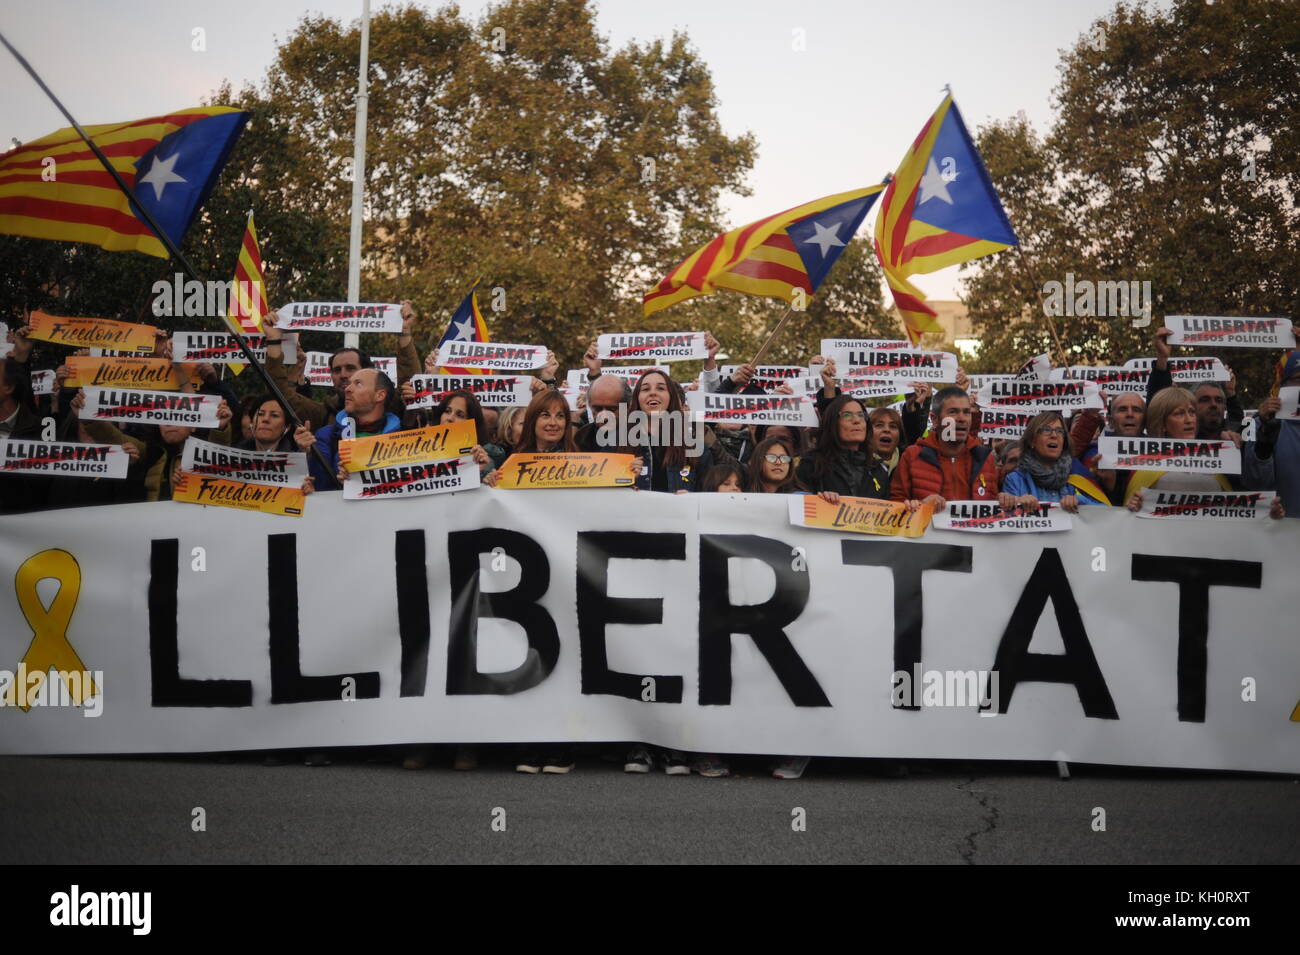 Barcelona,Catalonia, Spain. 11th November 2017. Demonstration in Marina Street to protest against the imprisonment of pro-independence catalan political leaders and to claim for the liberation of all political prisoners. Catalan government were imprisoned after the declaration of independence from Spanish state. Credit: Alberto Paredes / Alamy Live News Stock Photo